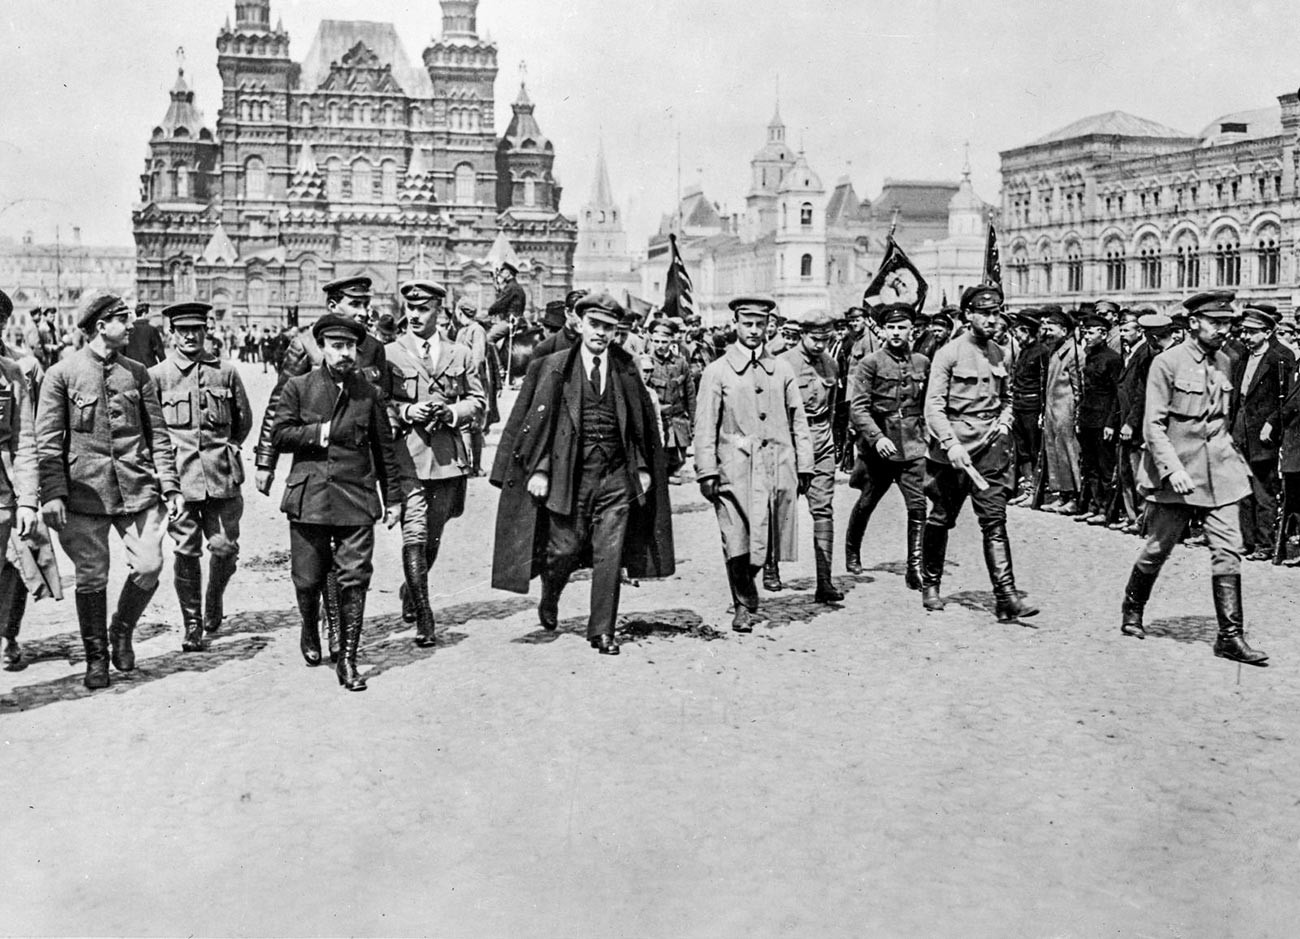 Vladimir Lenin, the Soviet revolutionary leader of the proletariat with a group of commanders in the Red Square